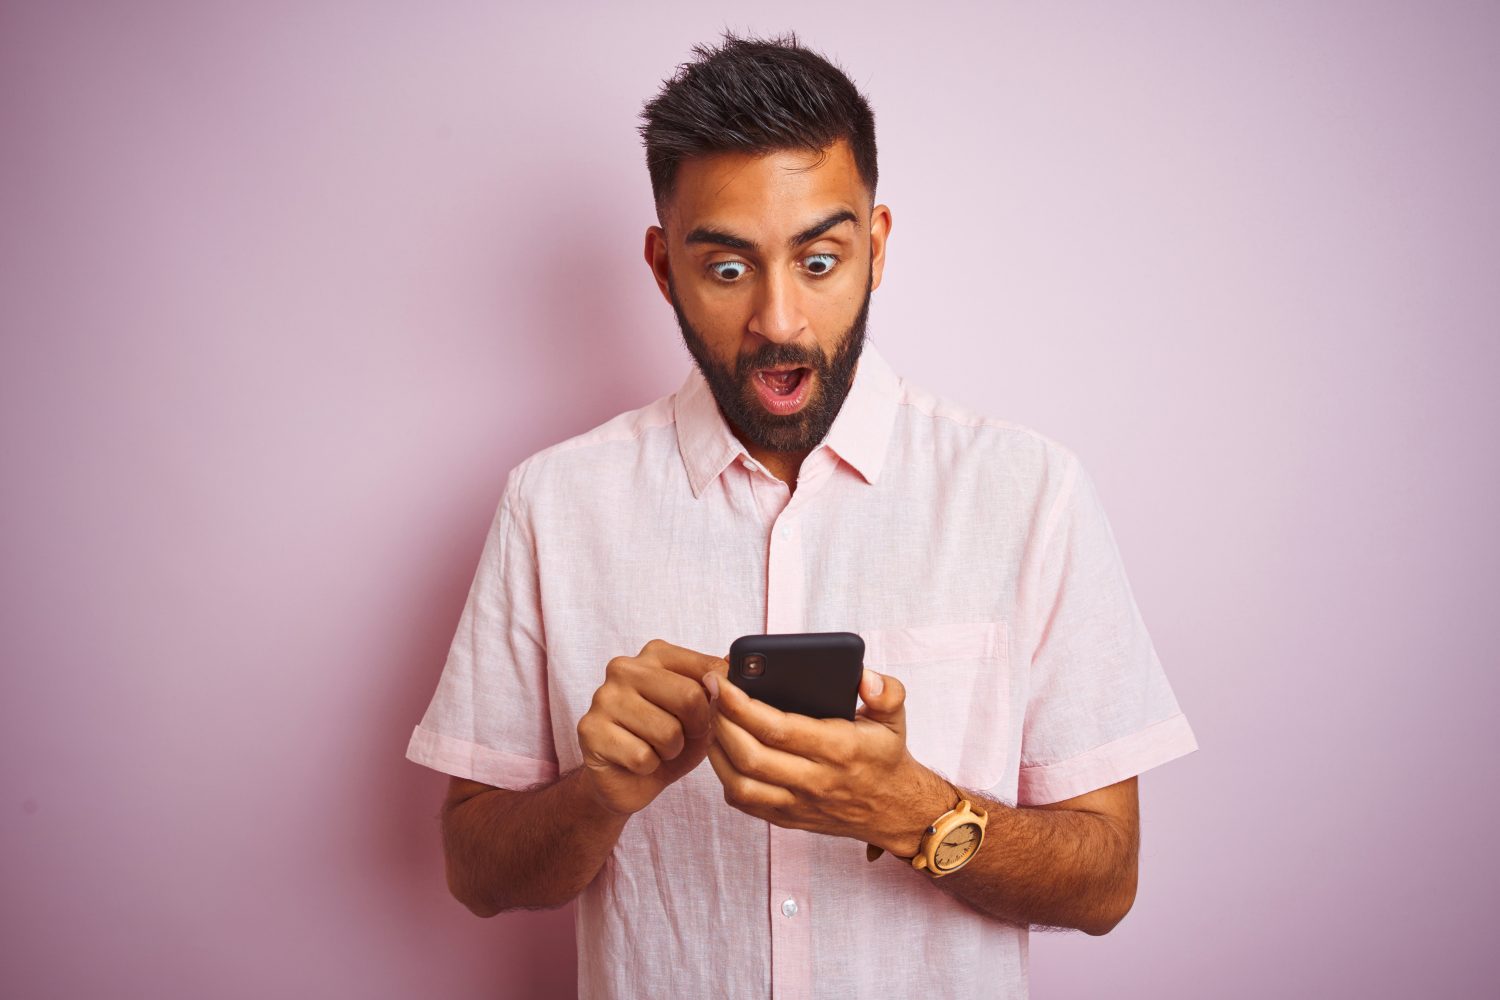 Young indian man using smartphone standing over isolated pink background scared in shock with a surprise face, afraid and excited with fear expression